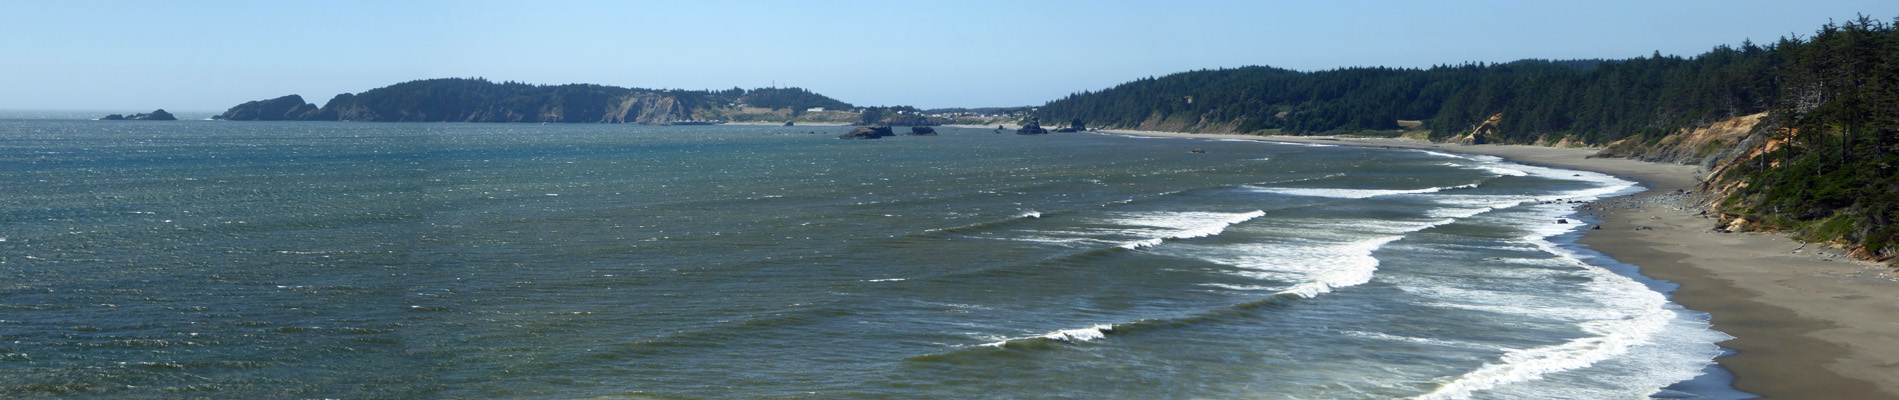 South of Port Orford OR